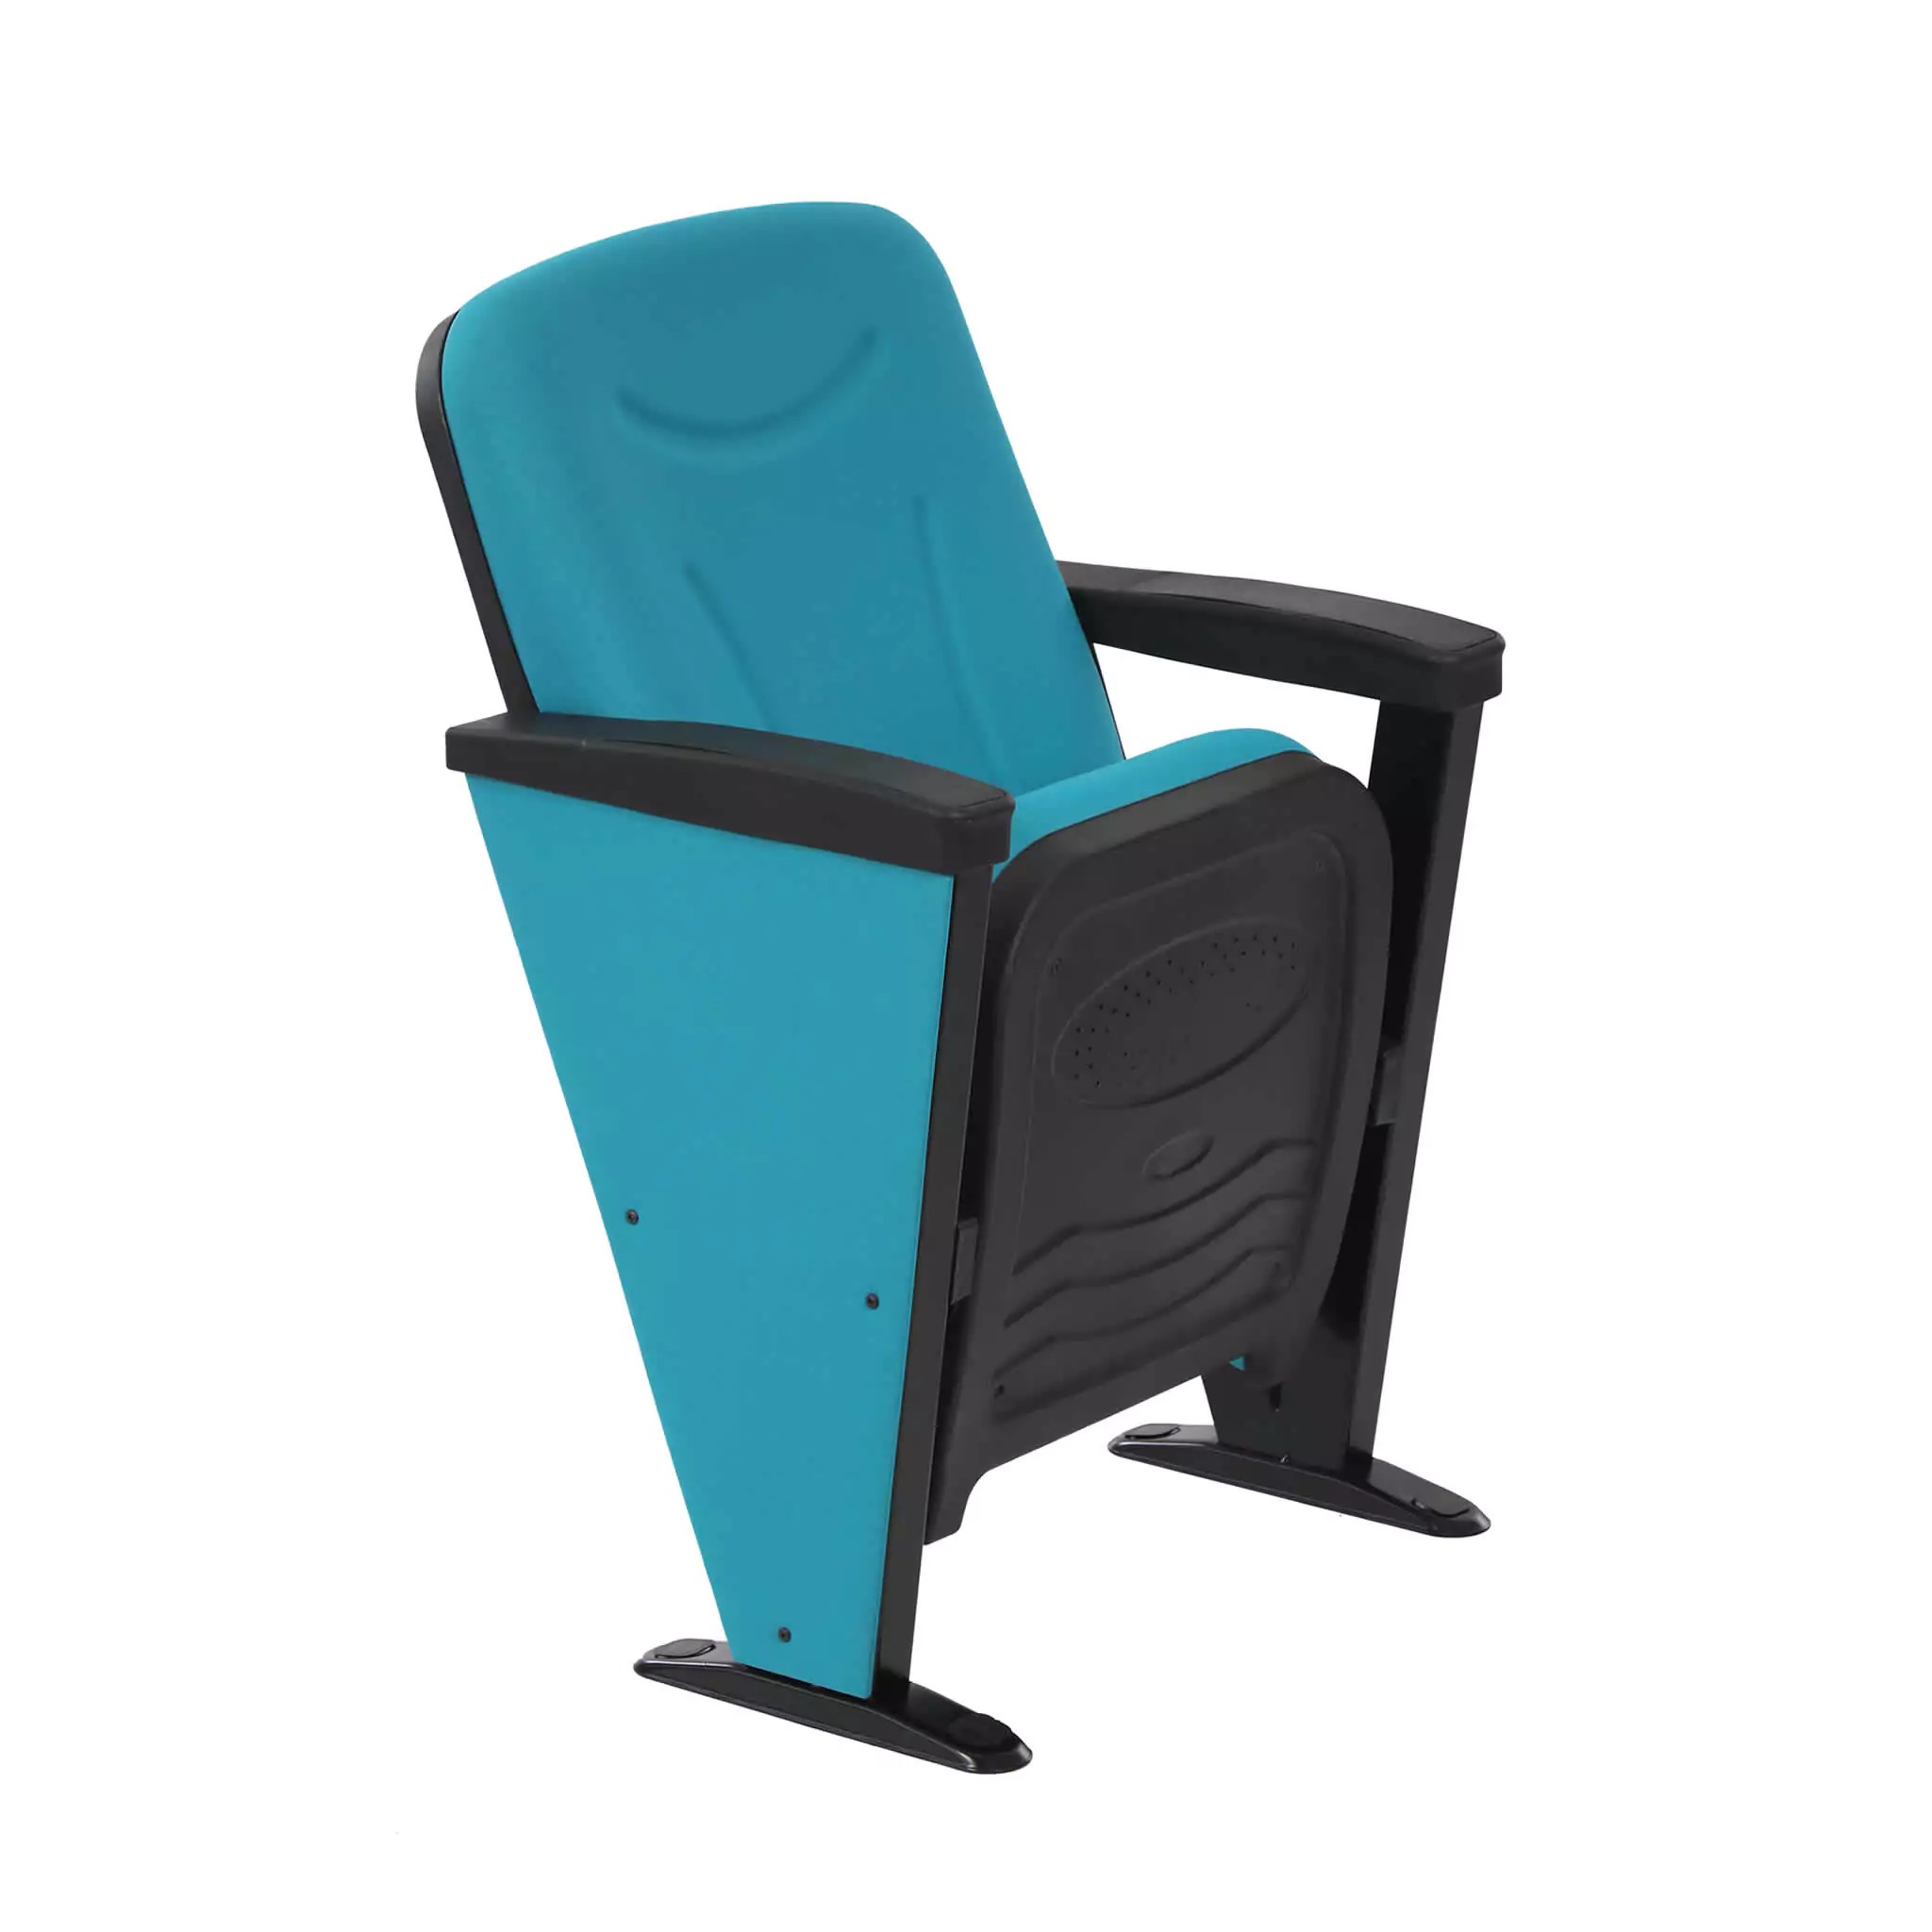 Simko Seating Products Conference Seat Zirkon S V 02